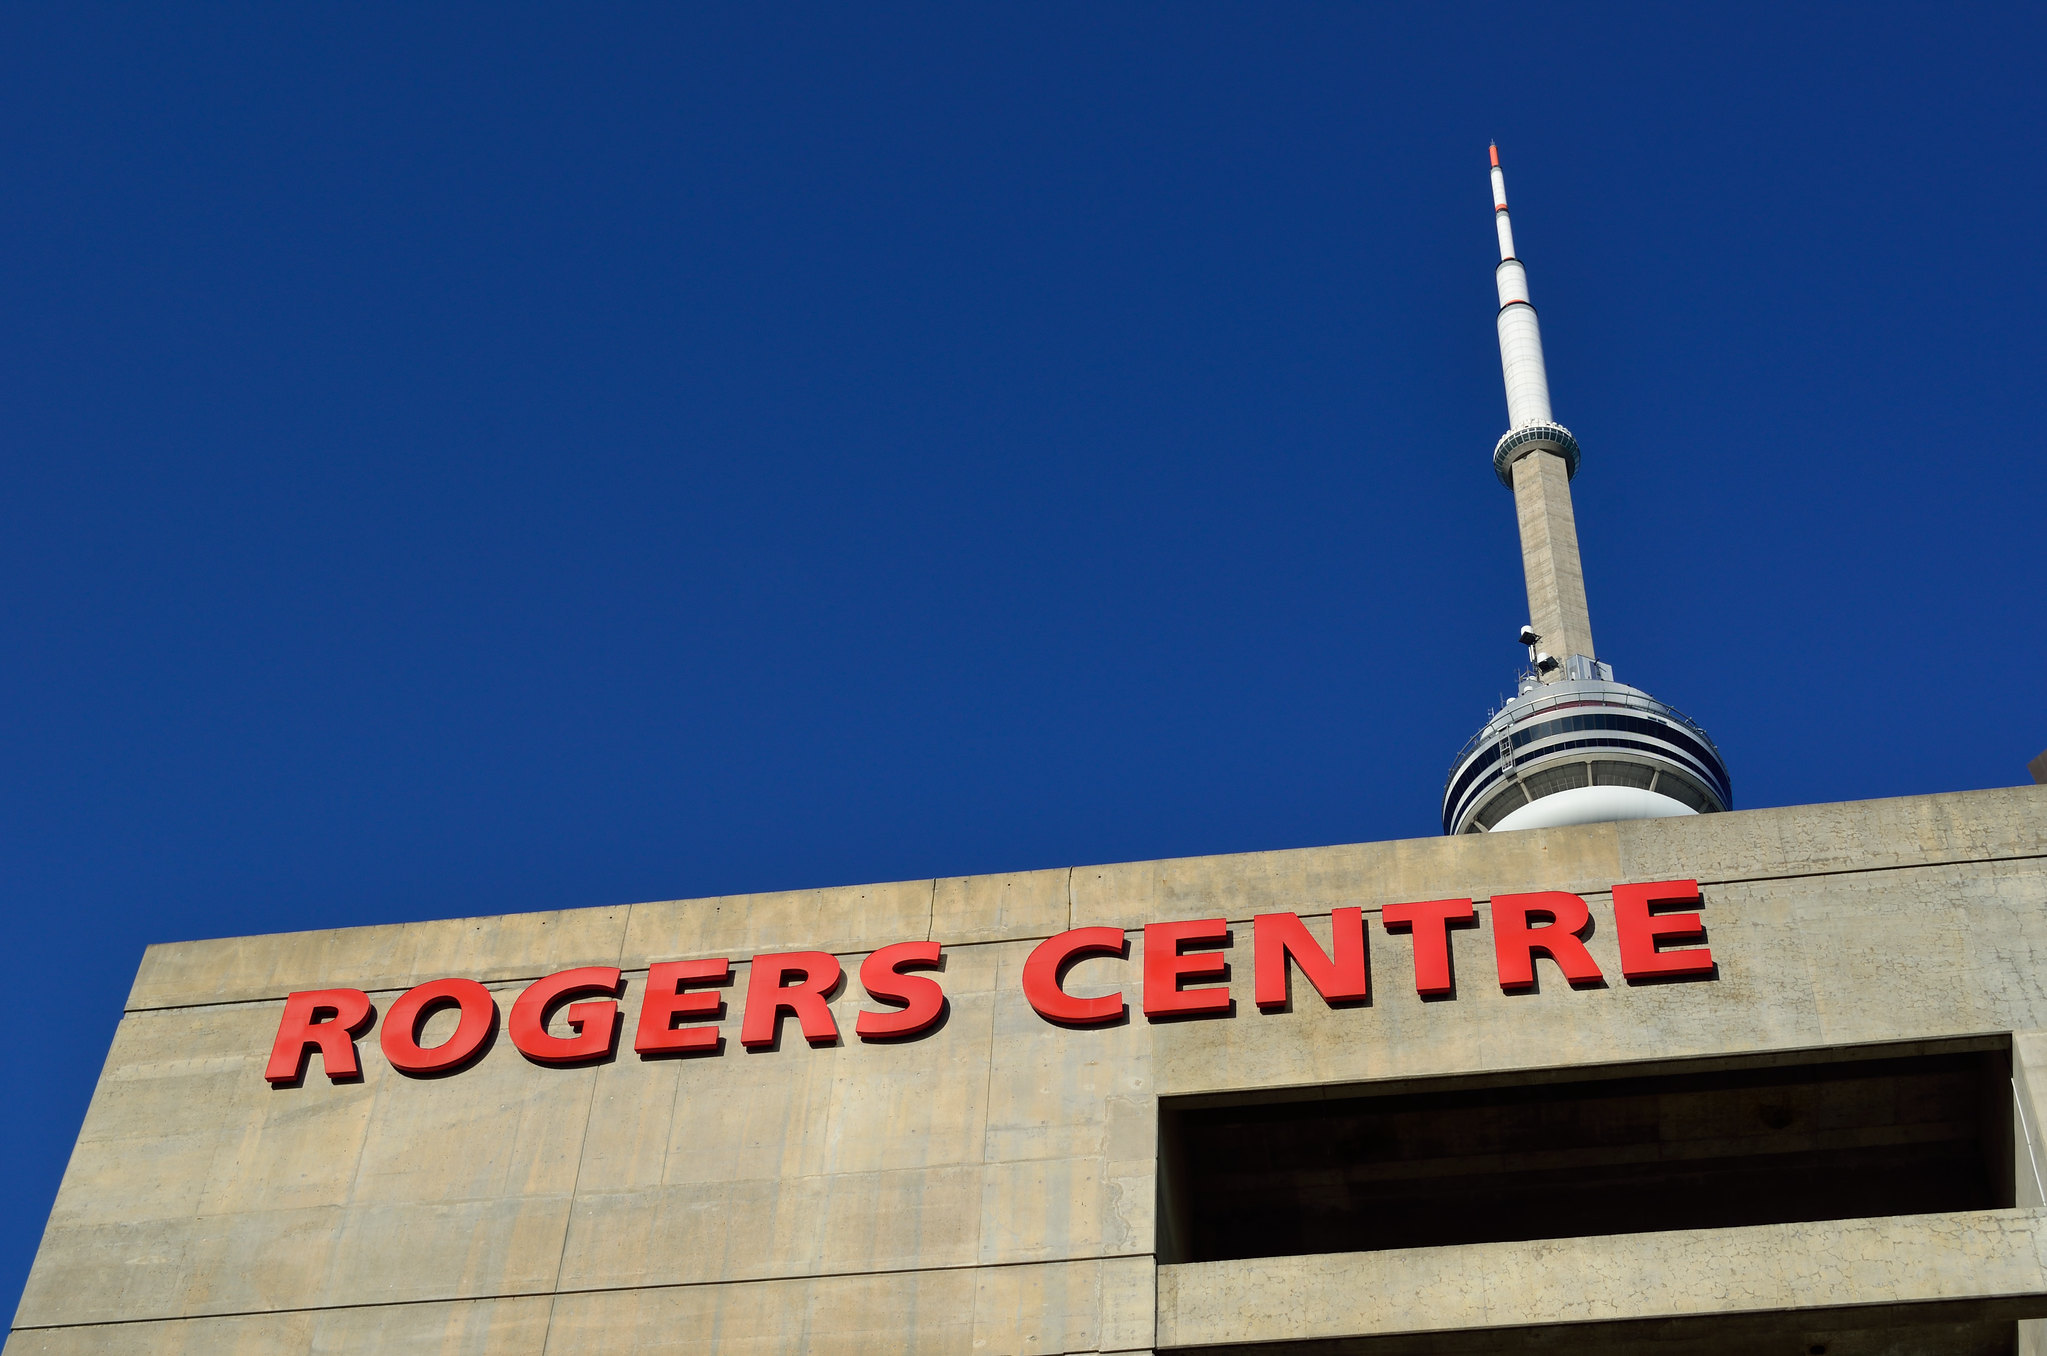 CN Tower and Rogers Centre, Toronto, Ontario